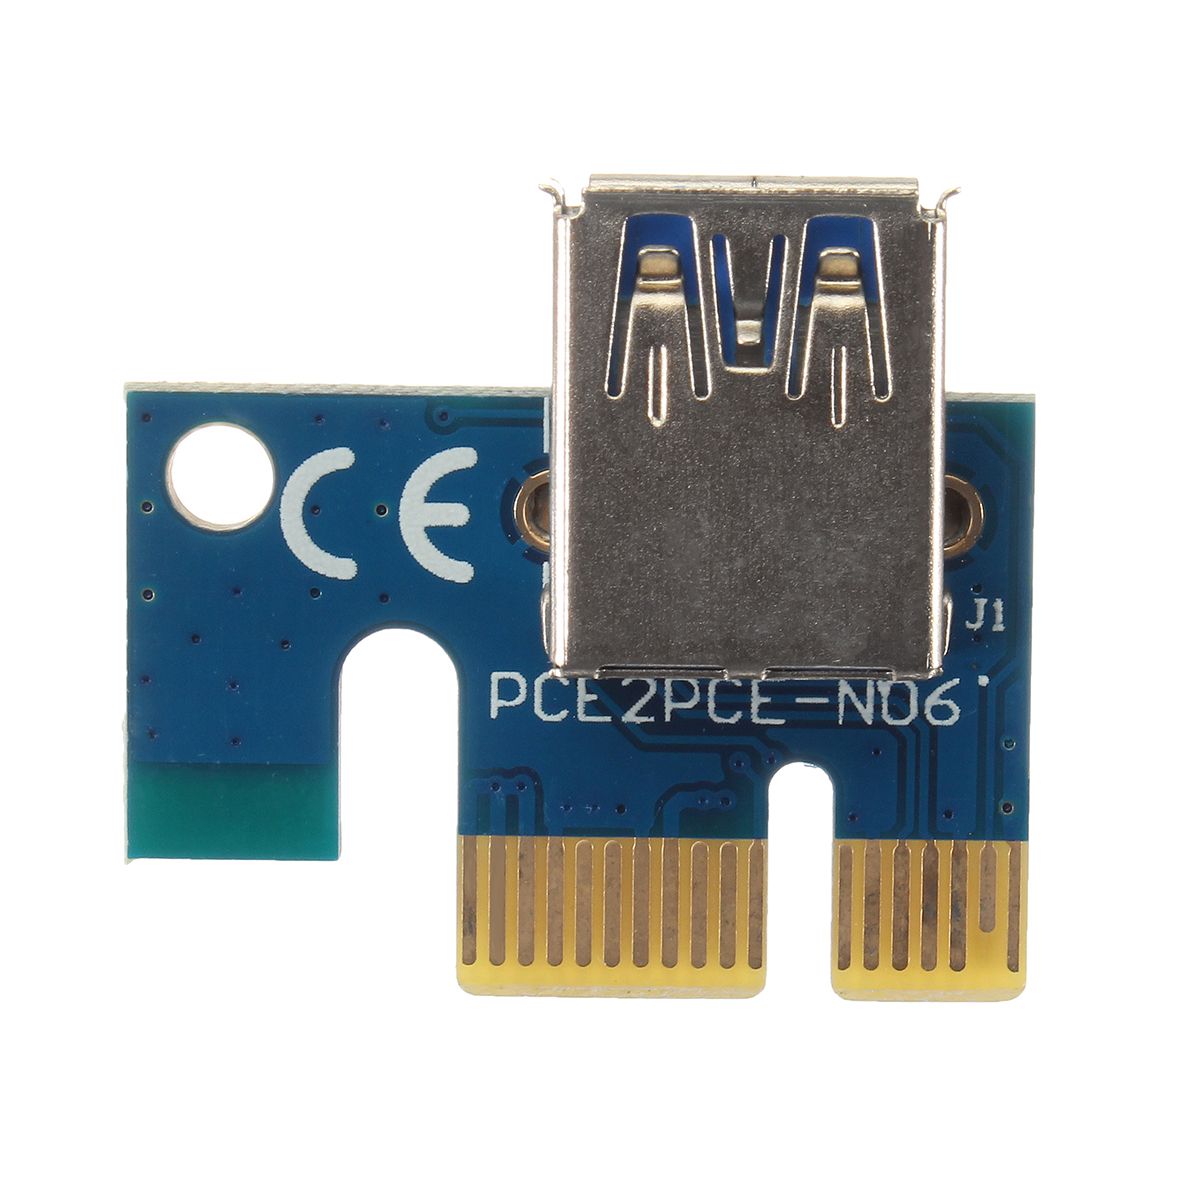 PCI-E-Express-USB30-1x-to16x-Extender-Riser-Card-Adapter-SATA-Power-Cable-1634031